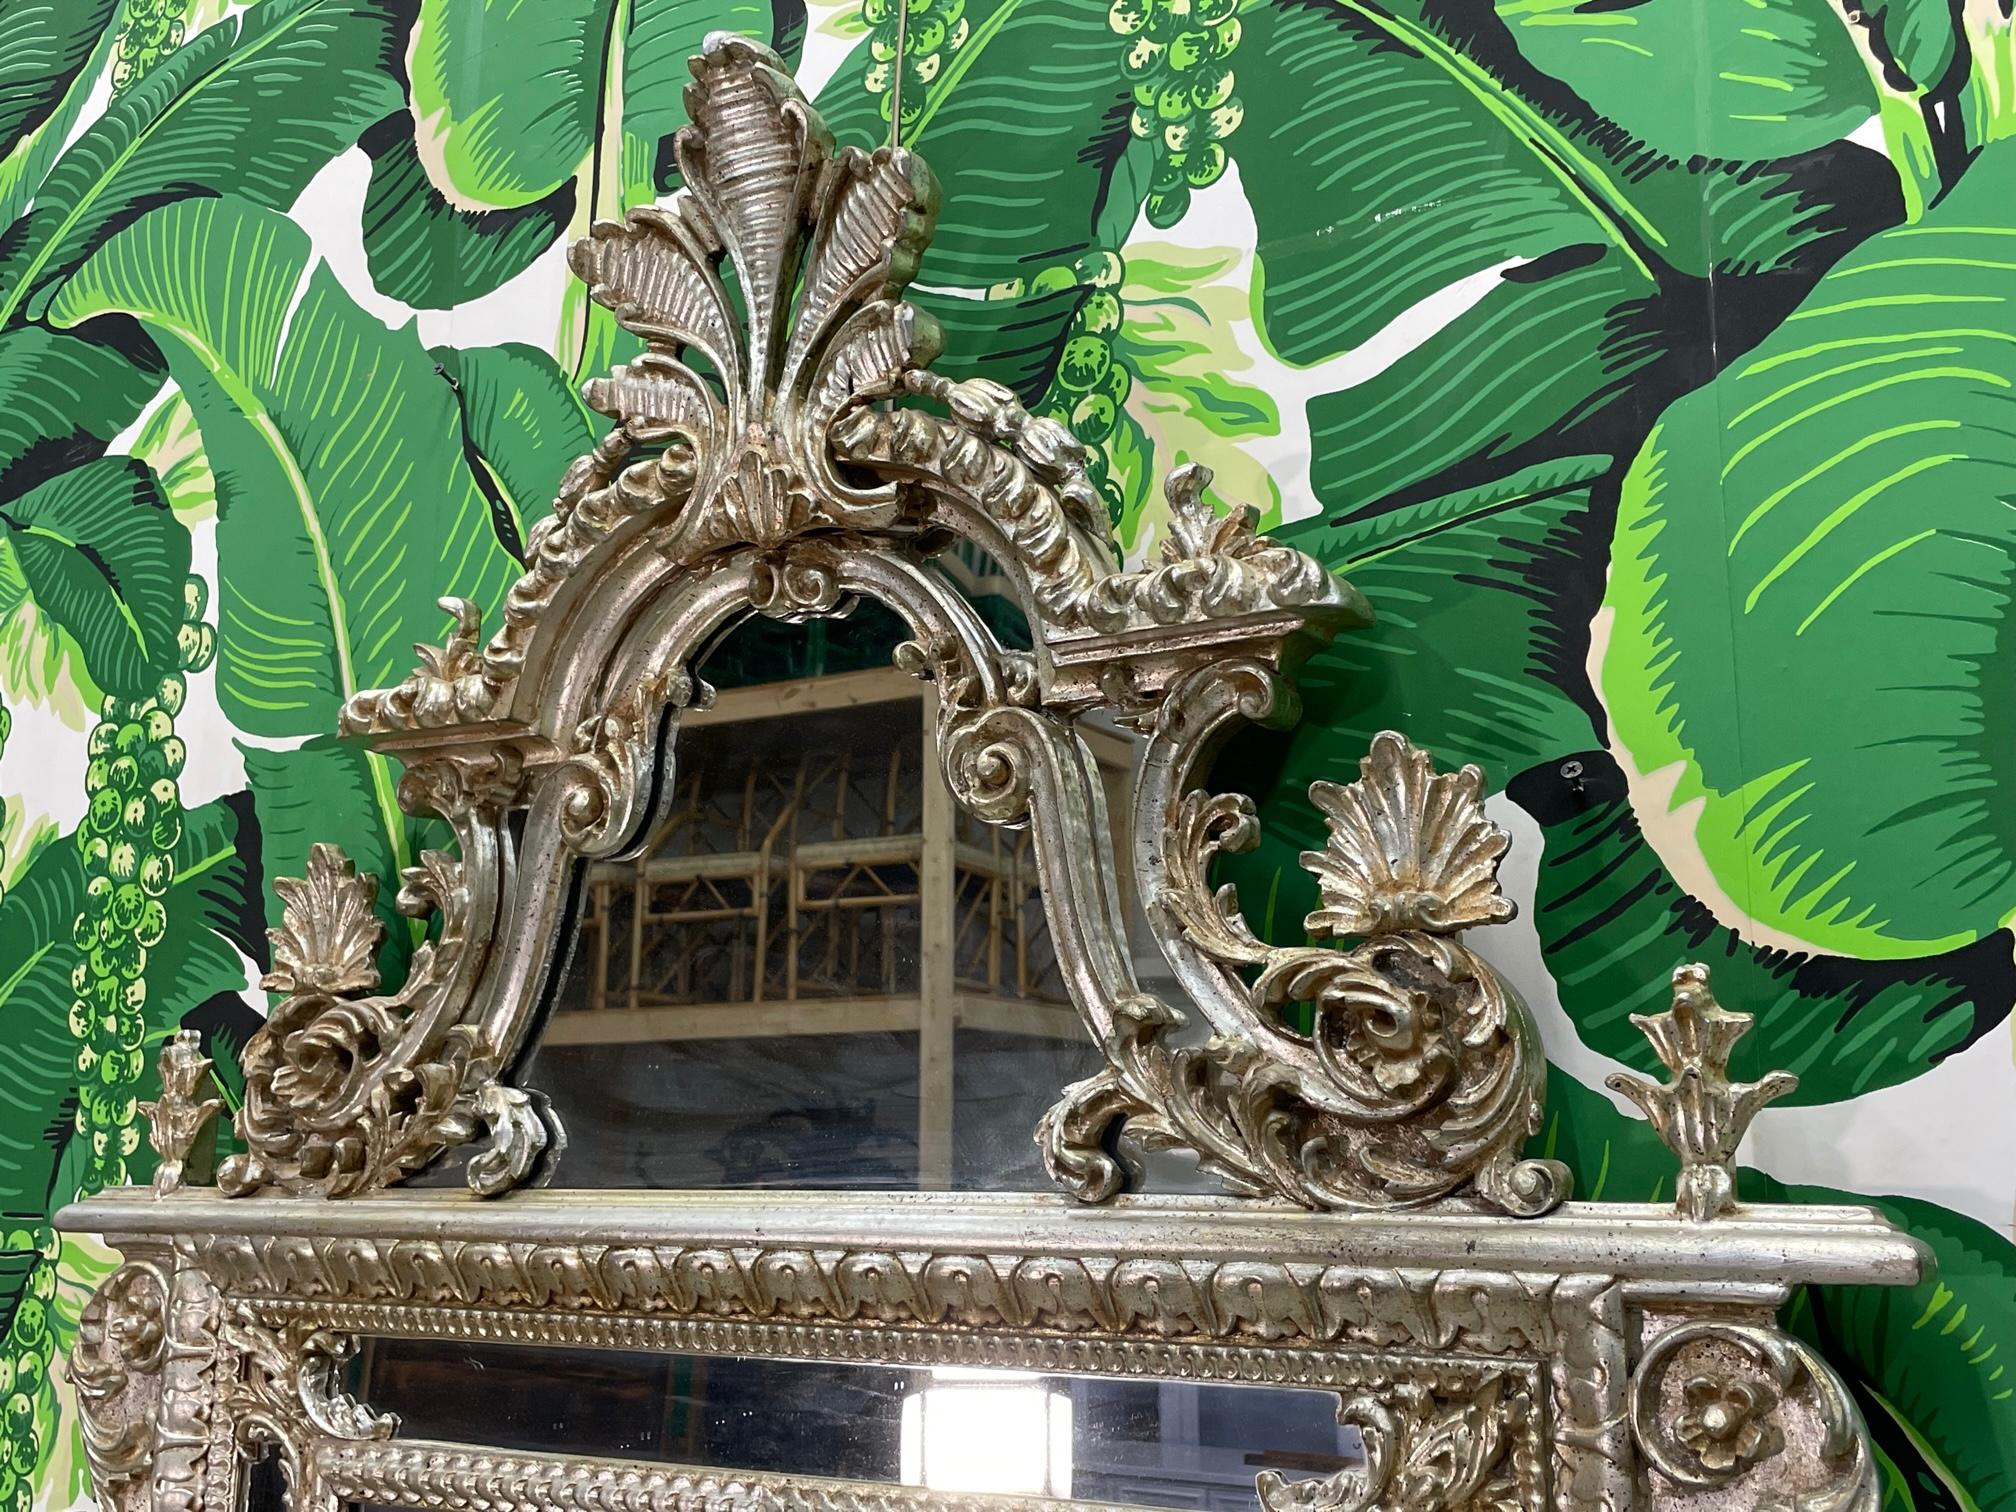 Monumental giltwood mirror by LaBarge features a hand carved double frame in a mottled silver leaf finish. A spectacular crown sits atop a head plinth with scrolled acanthus leaves and other foliate elements accented with palmettes and flowers. The